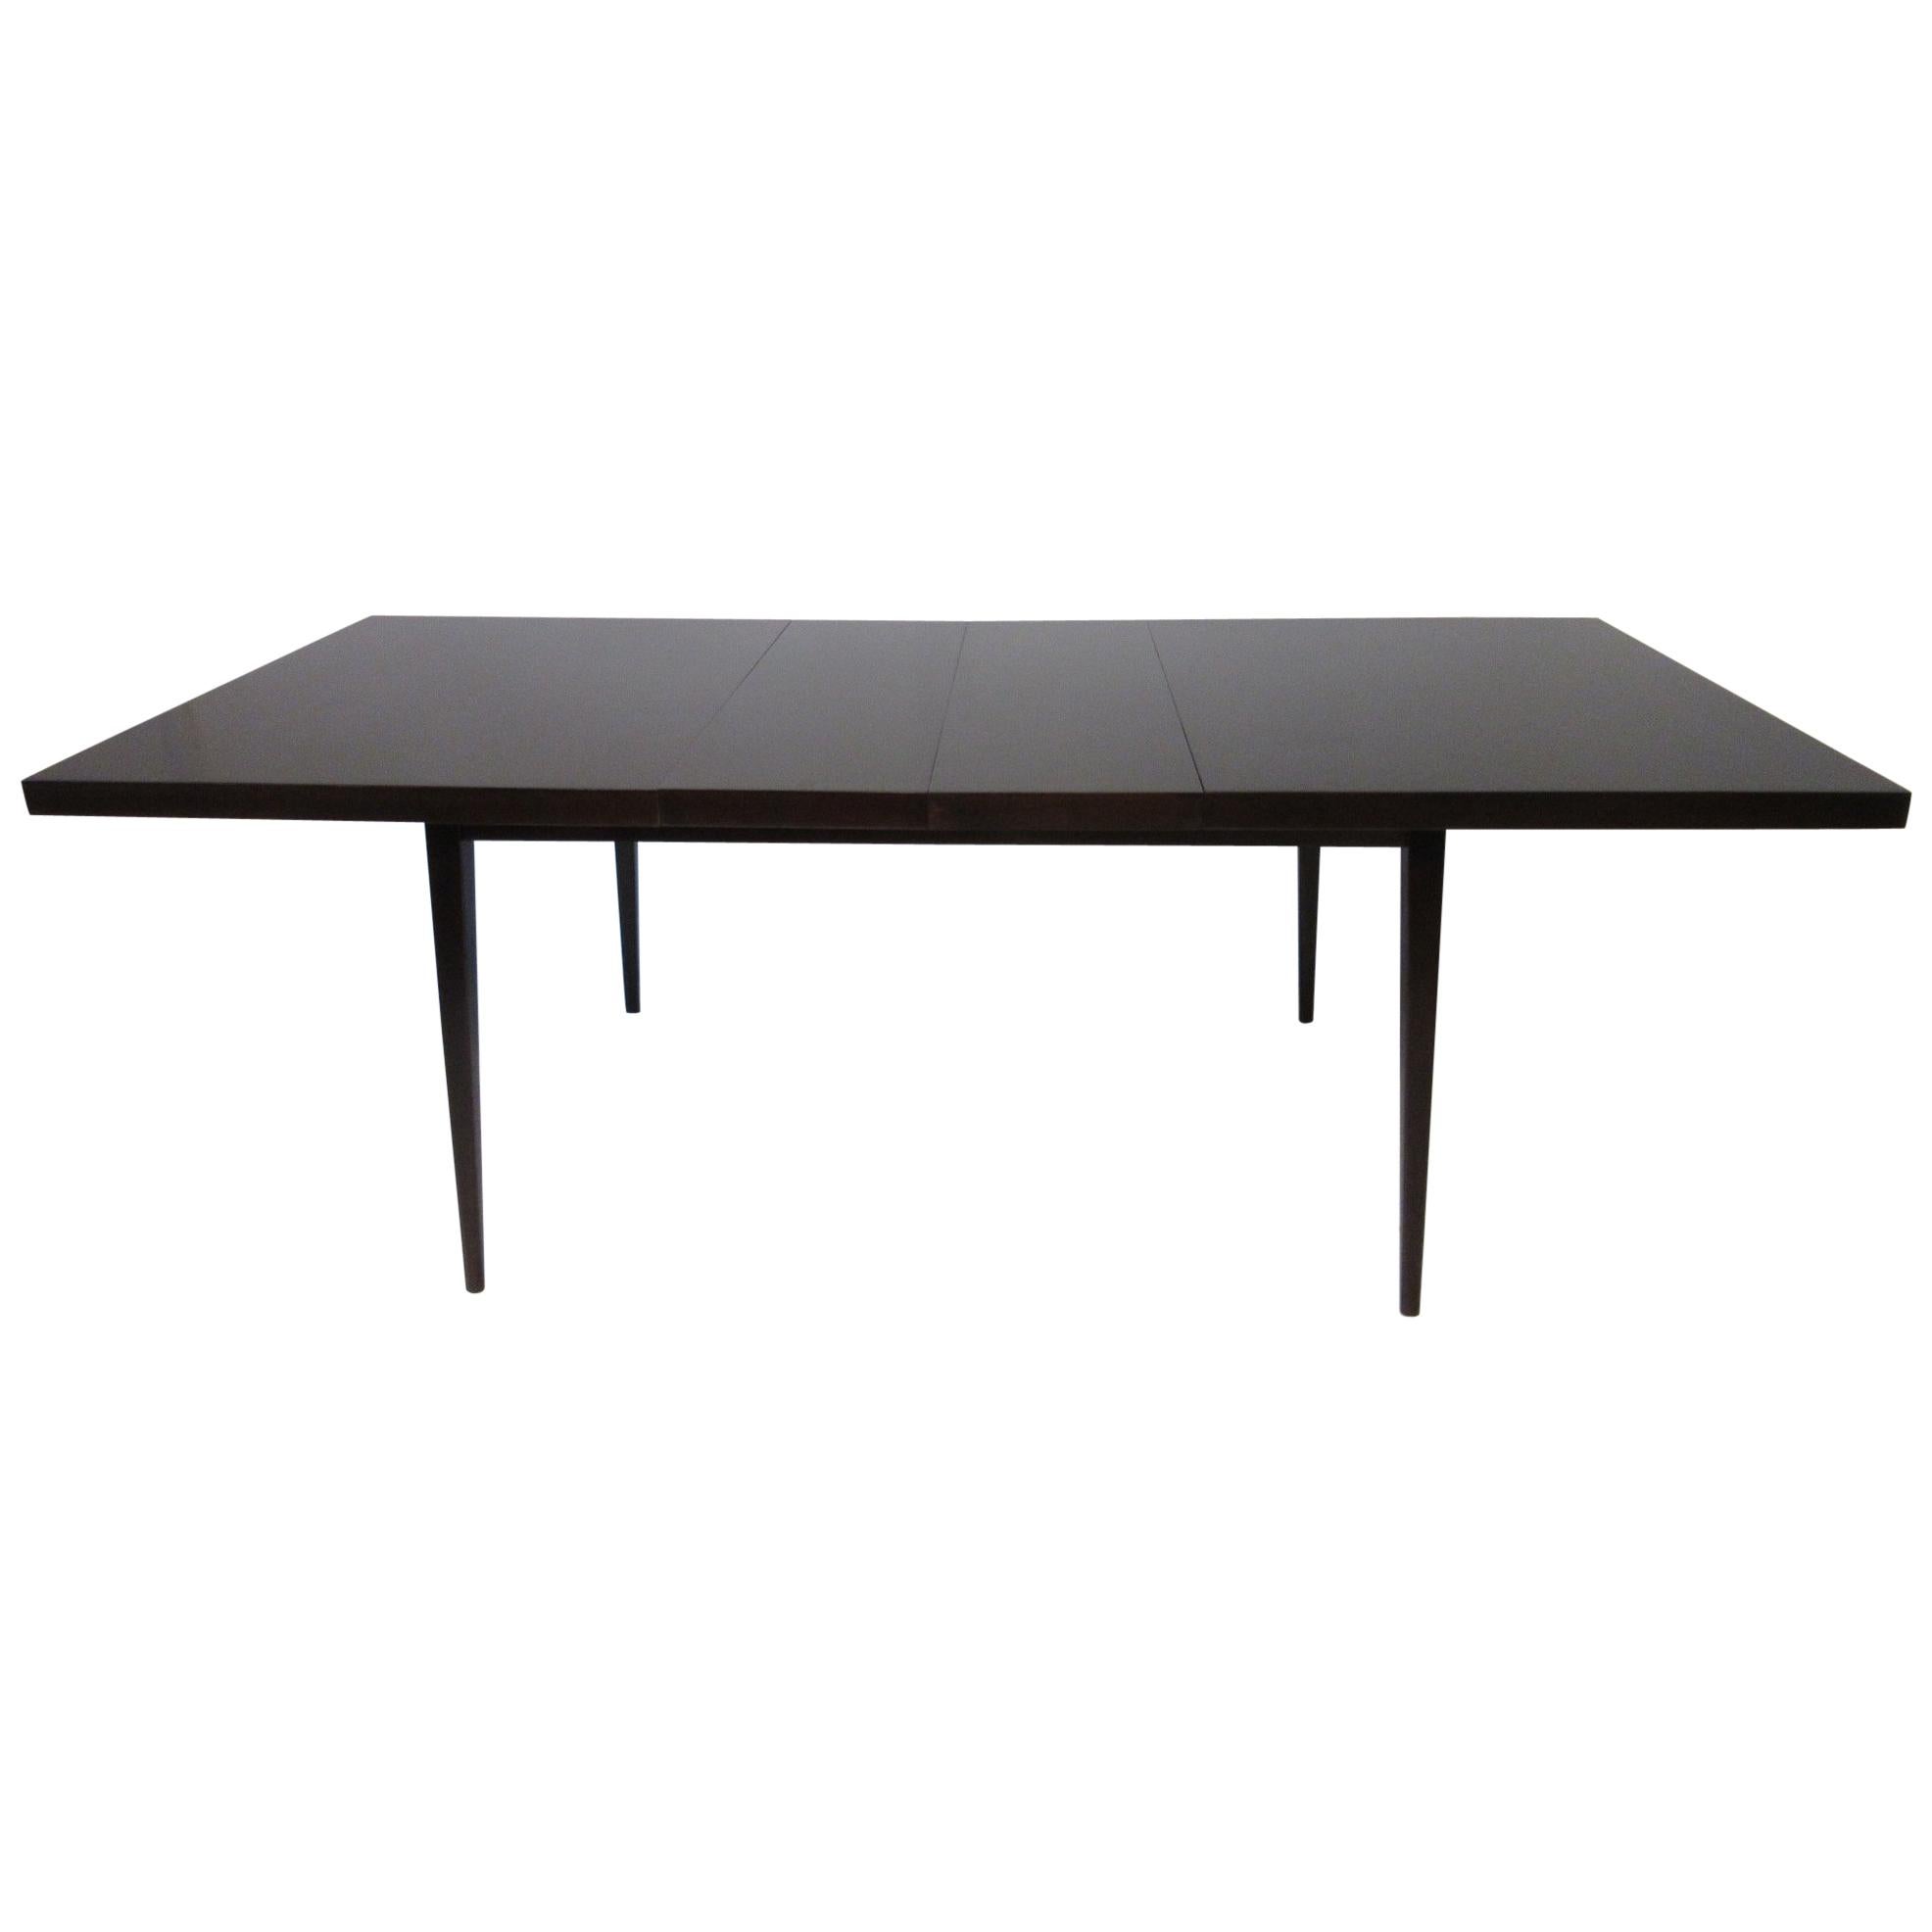 Paul McCobb Planner Group Ebony Finished Dining Table